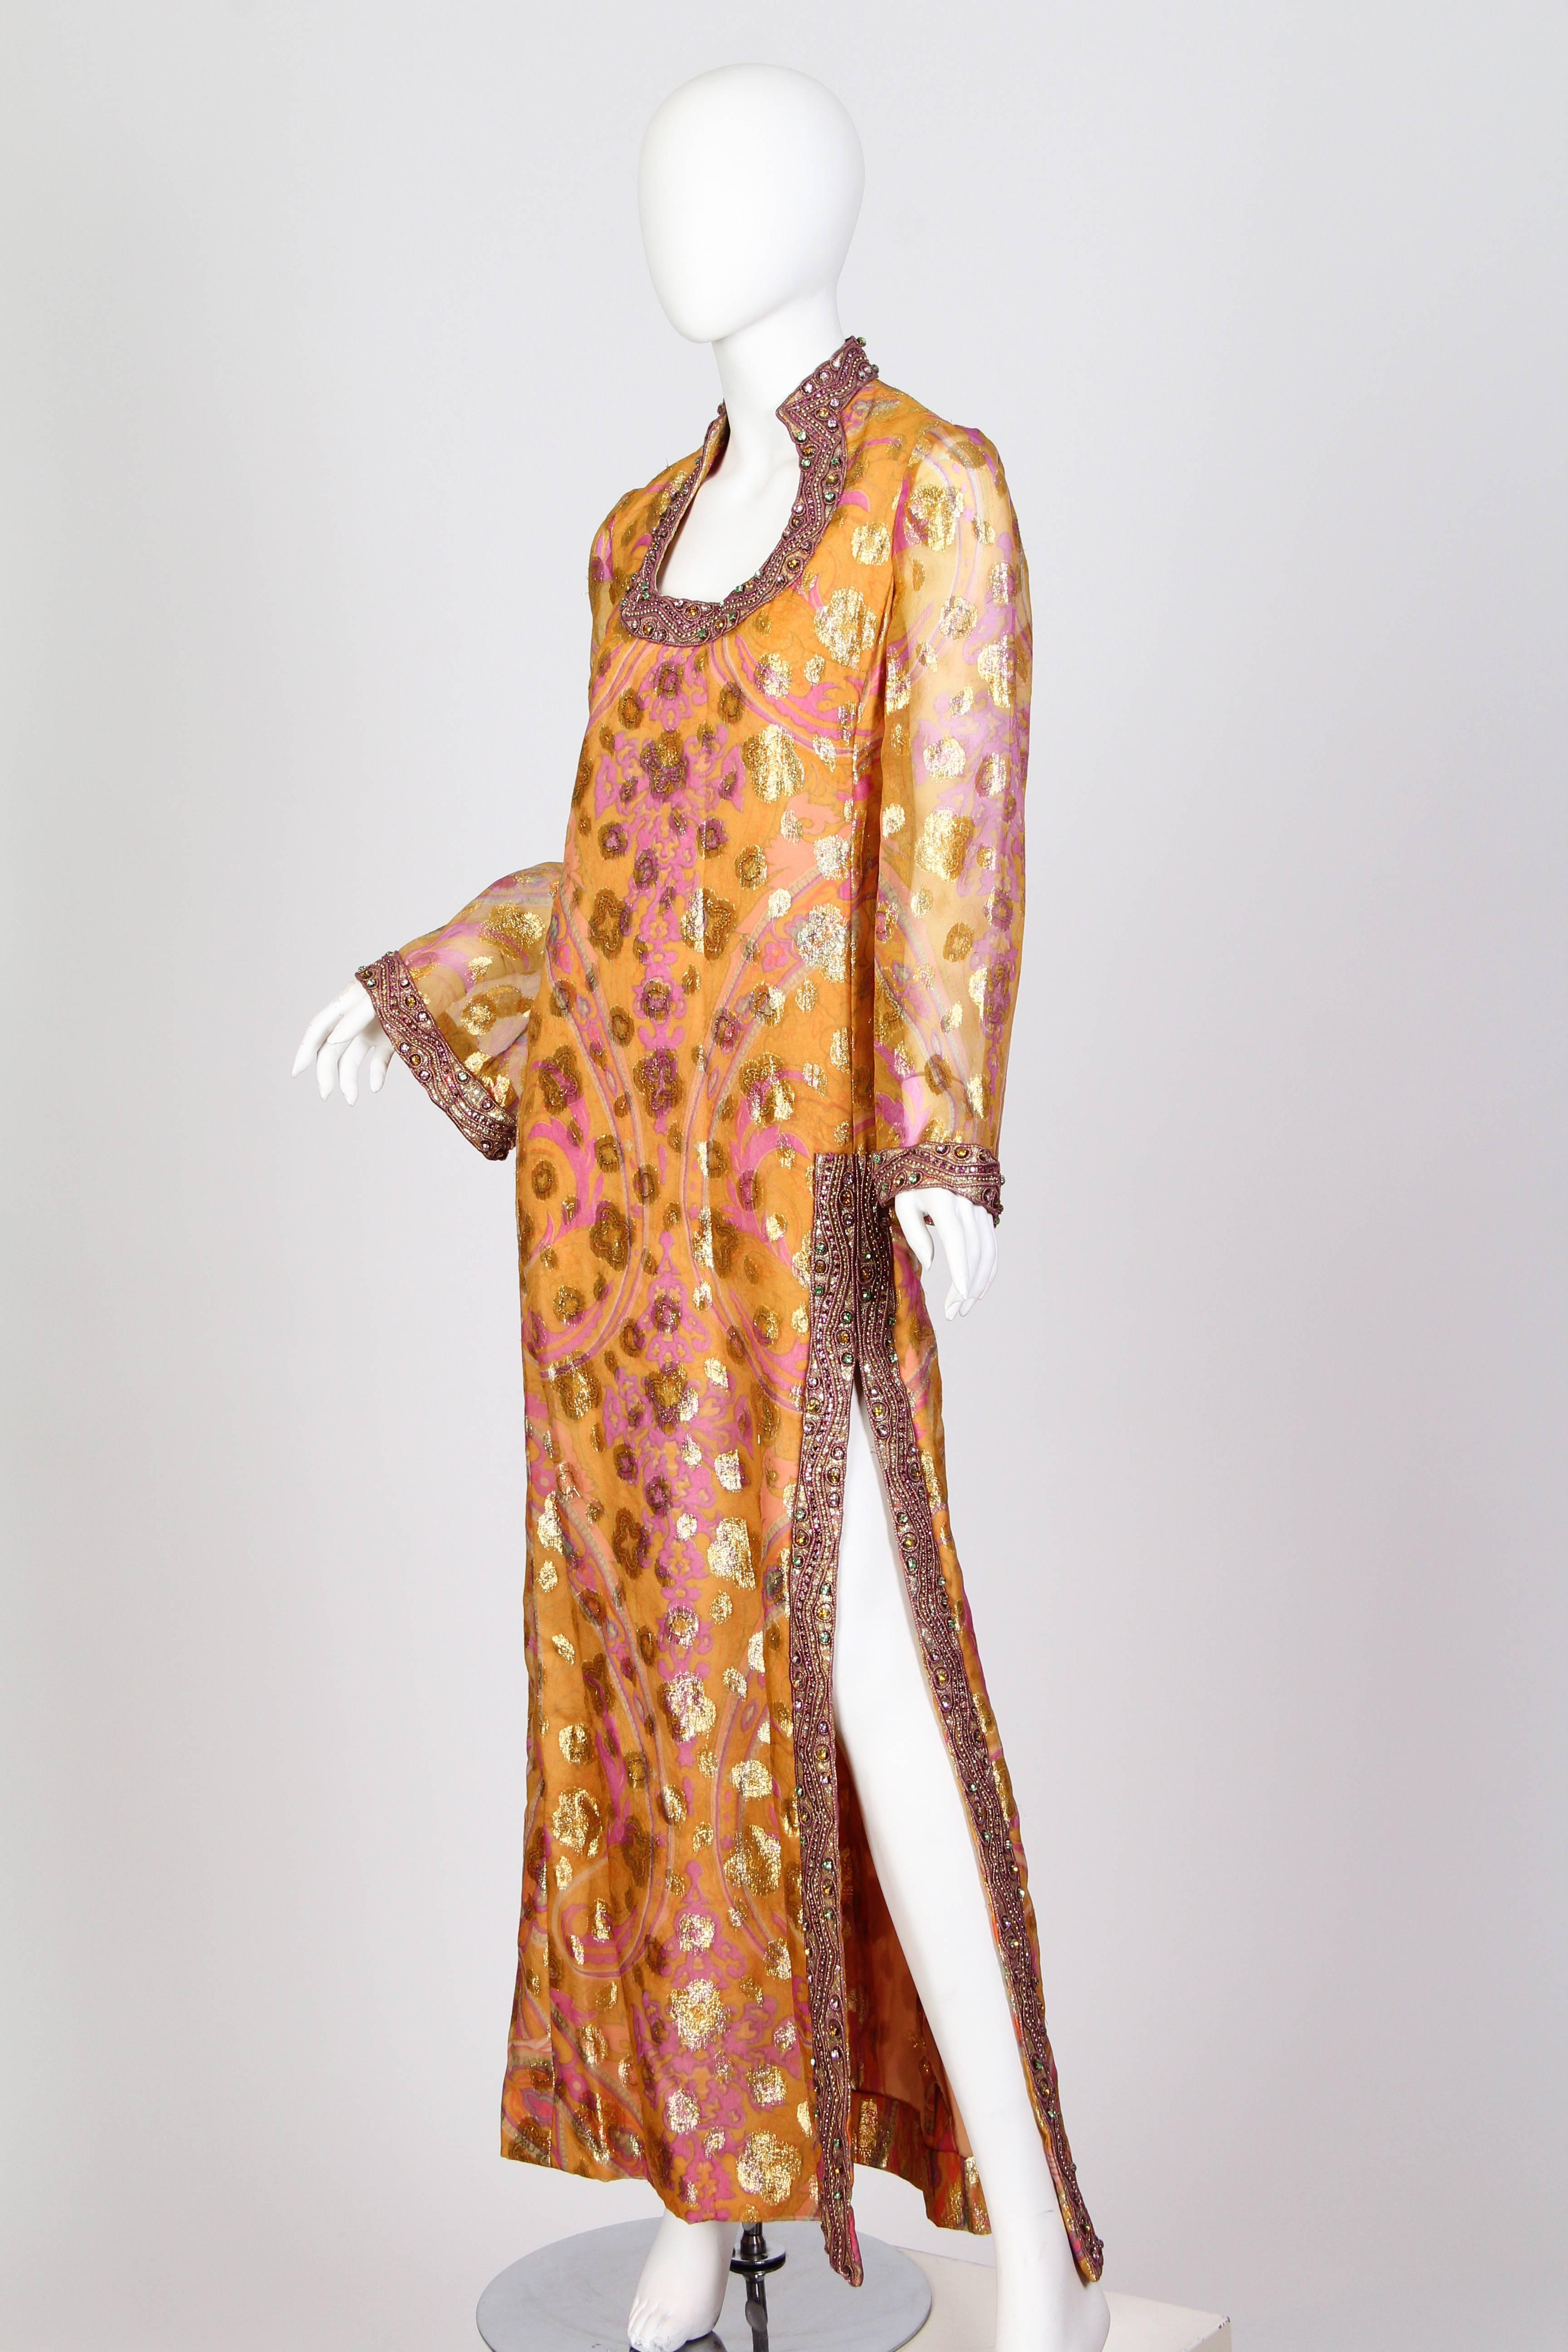 Fantastic luxe lurex organza has been printed with the patterns of the east in the colours of the sun. The stratigic slit and unique collar have been heavily embroidered in gold passimentrie which swirls around an array of large crystals. The long